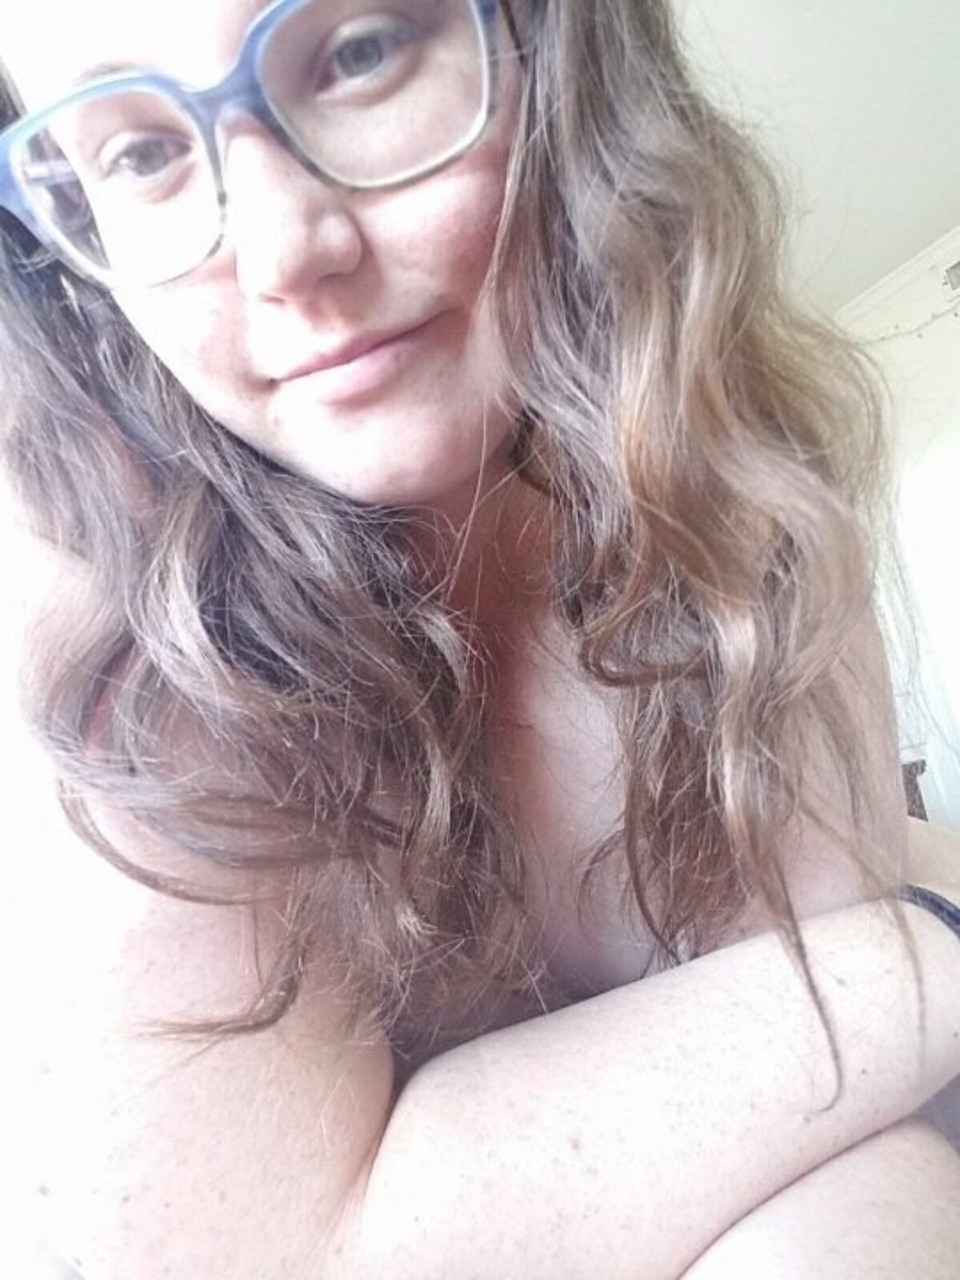 Another submission from this cutie, Kat. She sells her pictures on kik (serious buyers